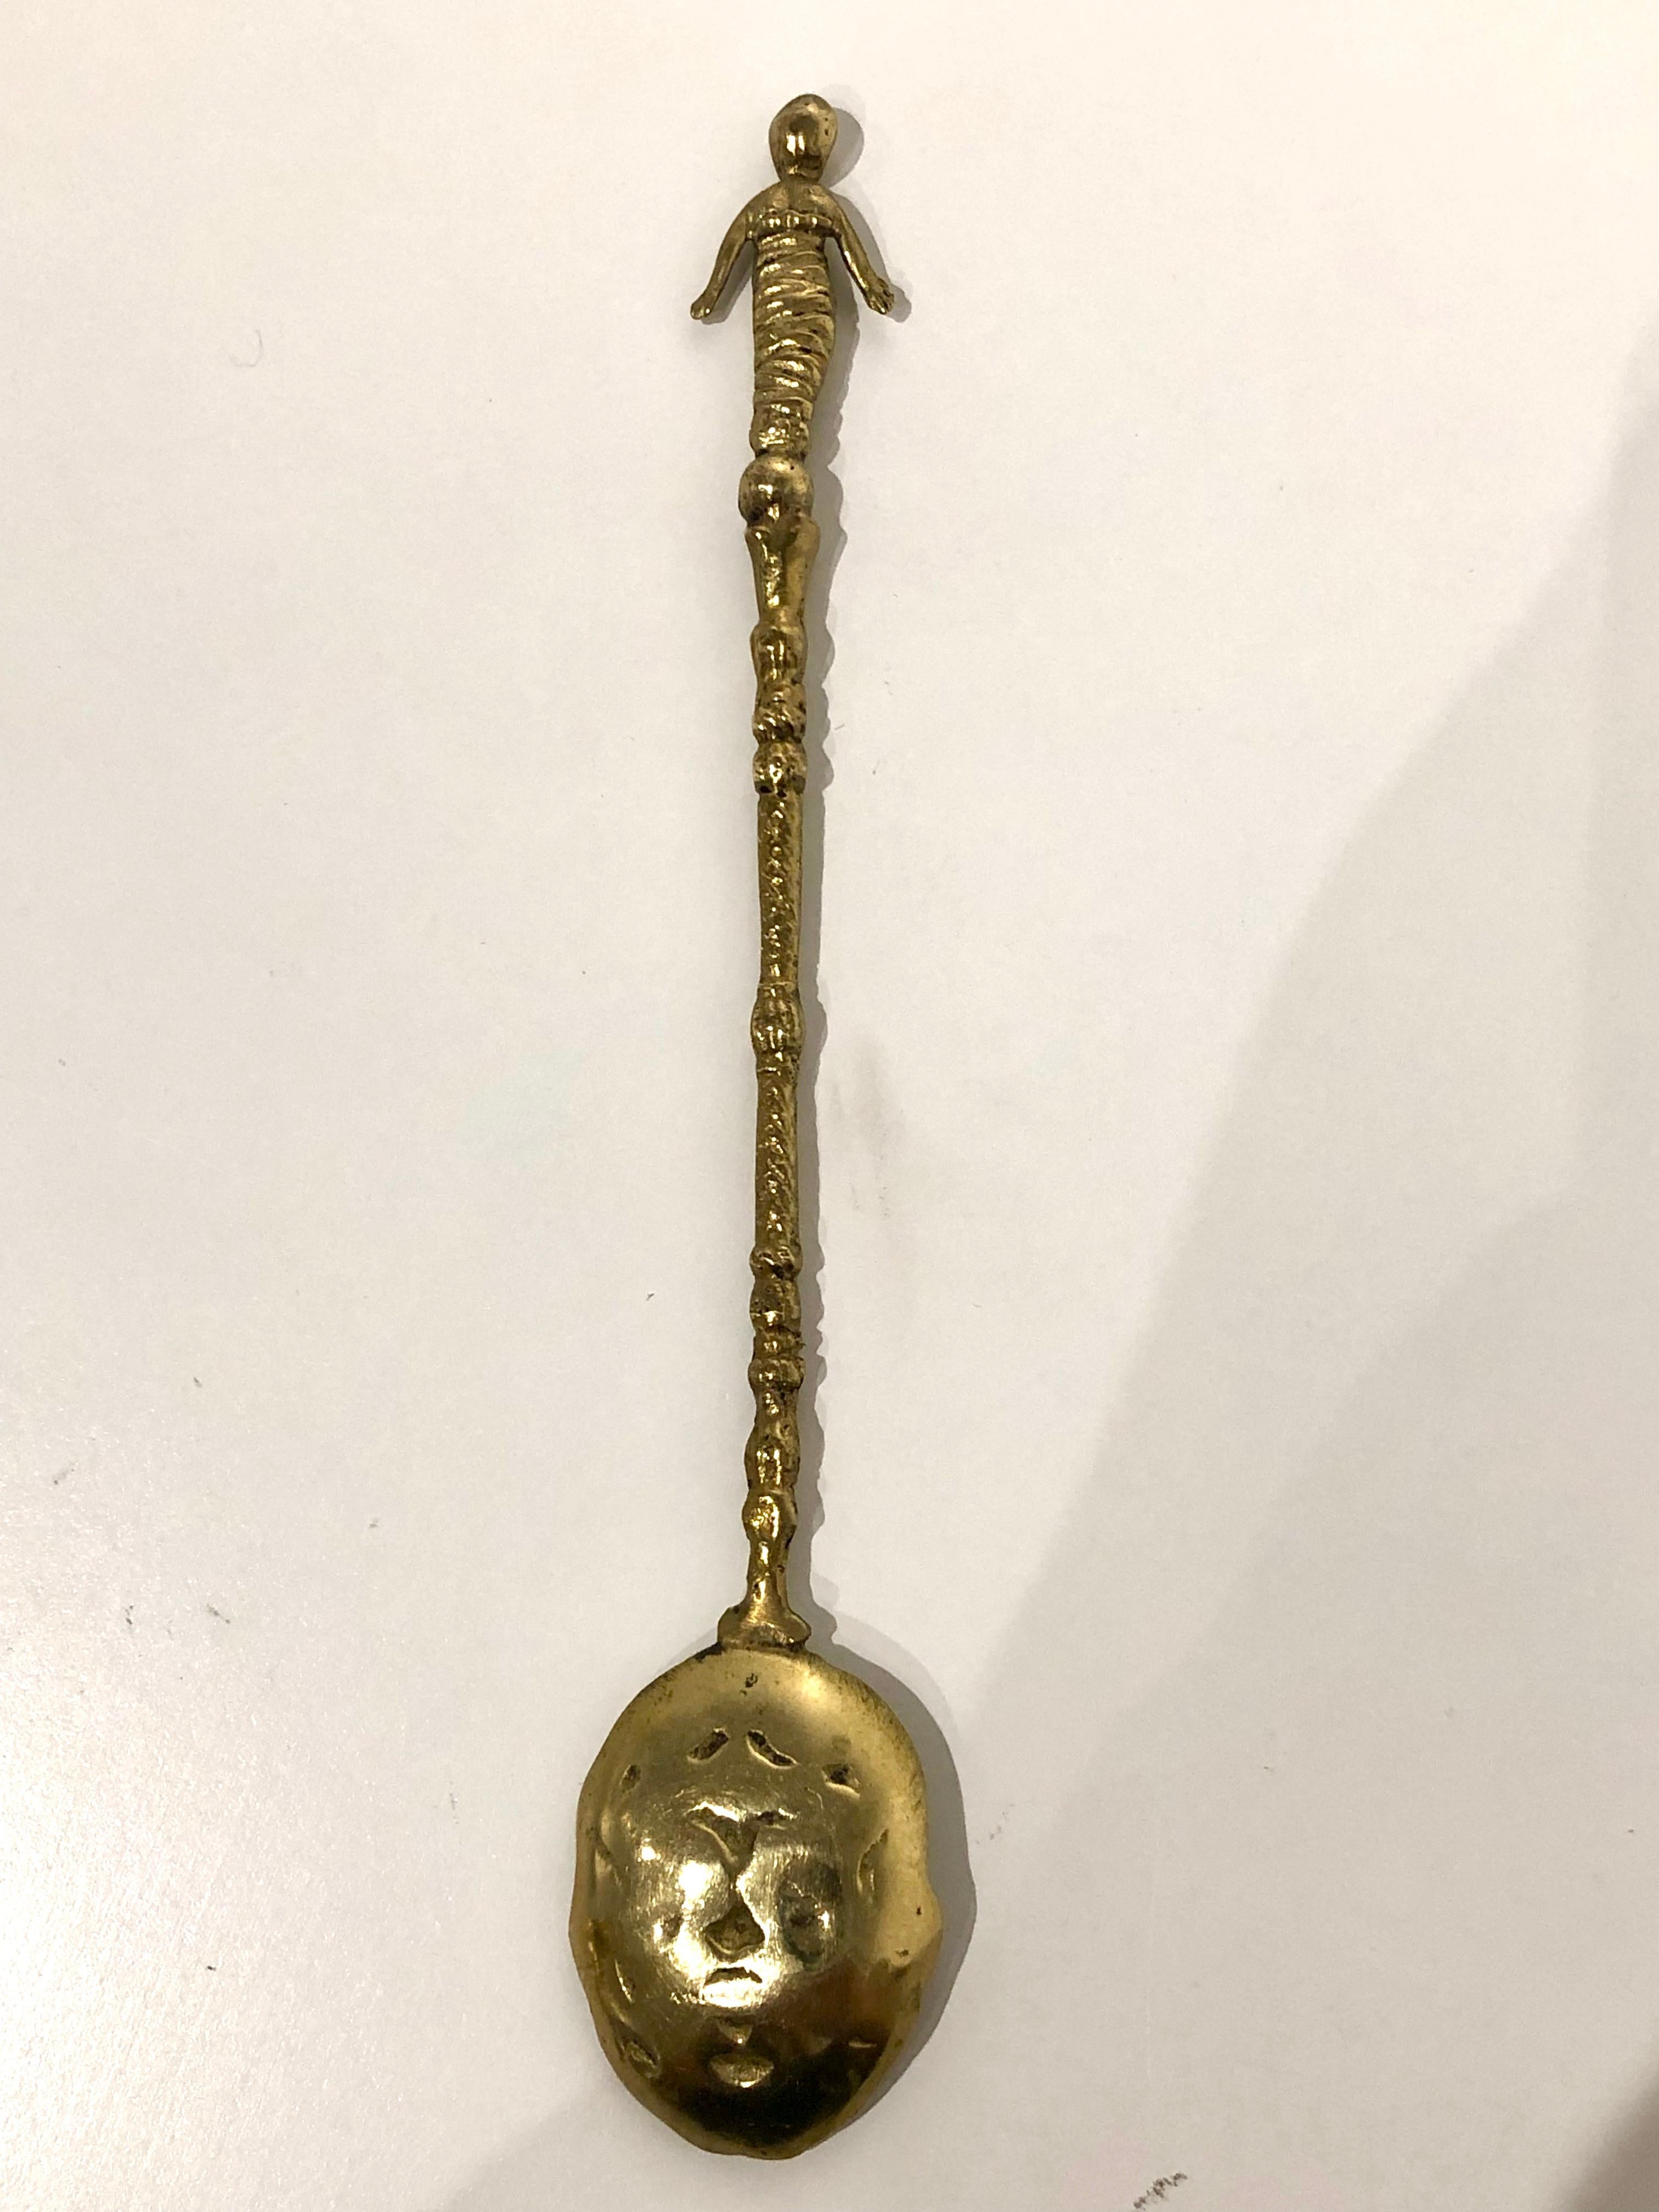 Beautiful and rare solid hammered brass spoon, unique collectible and decorative piece. Stamped in the back Italy.